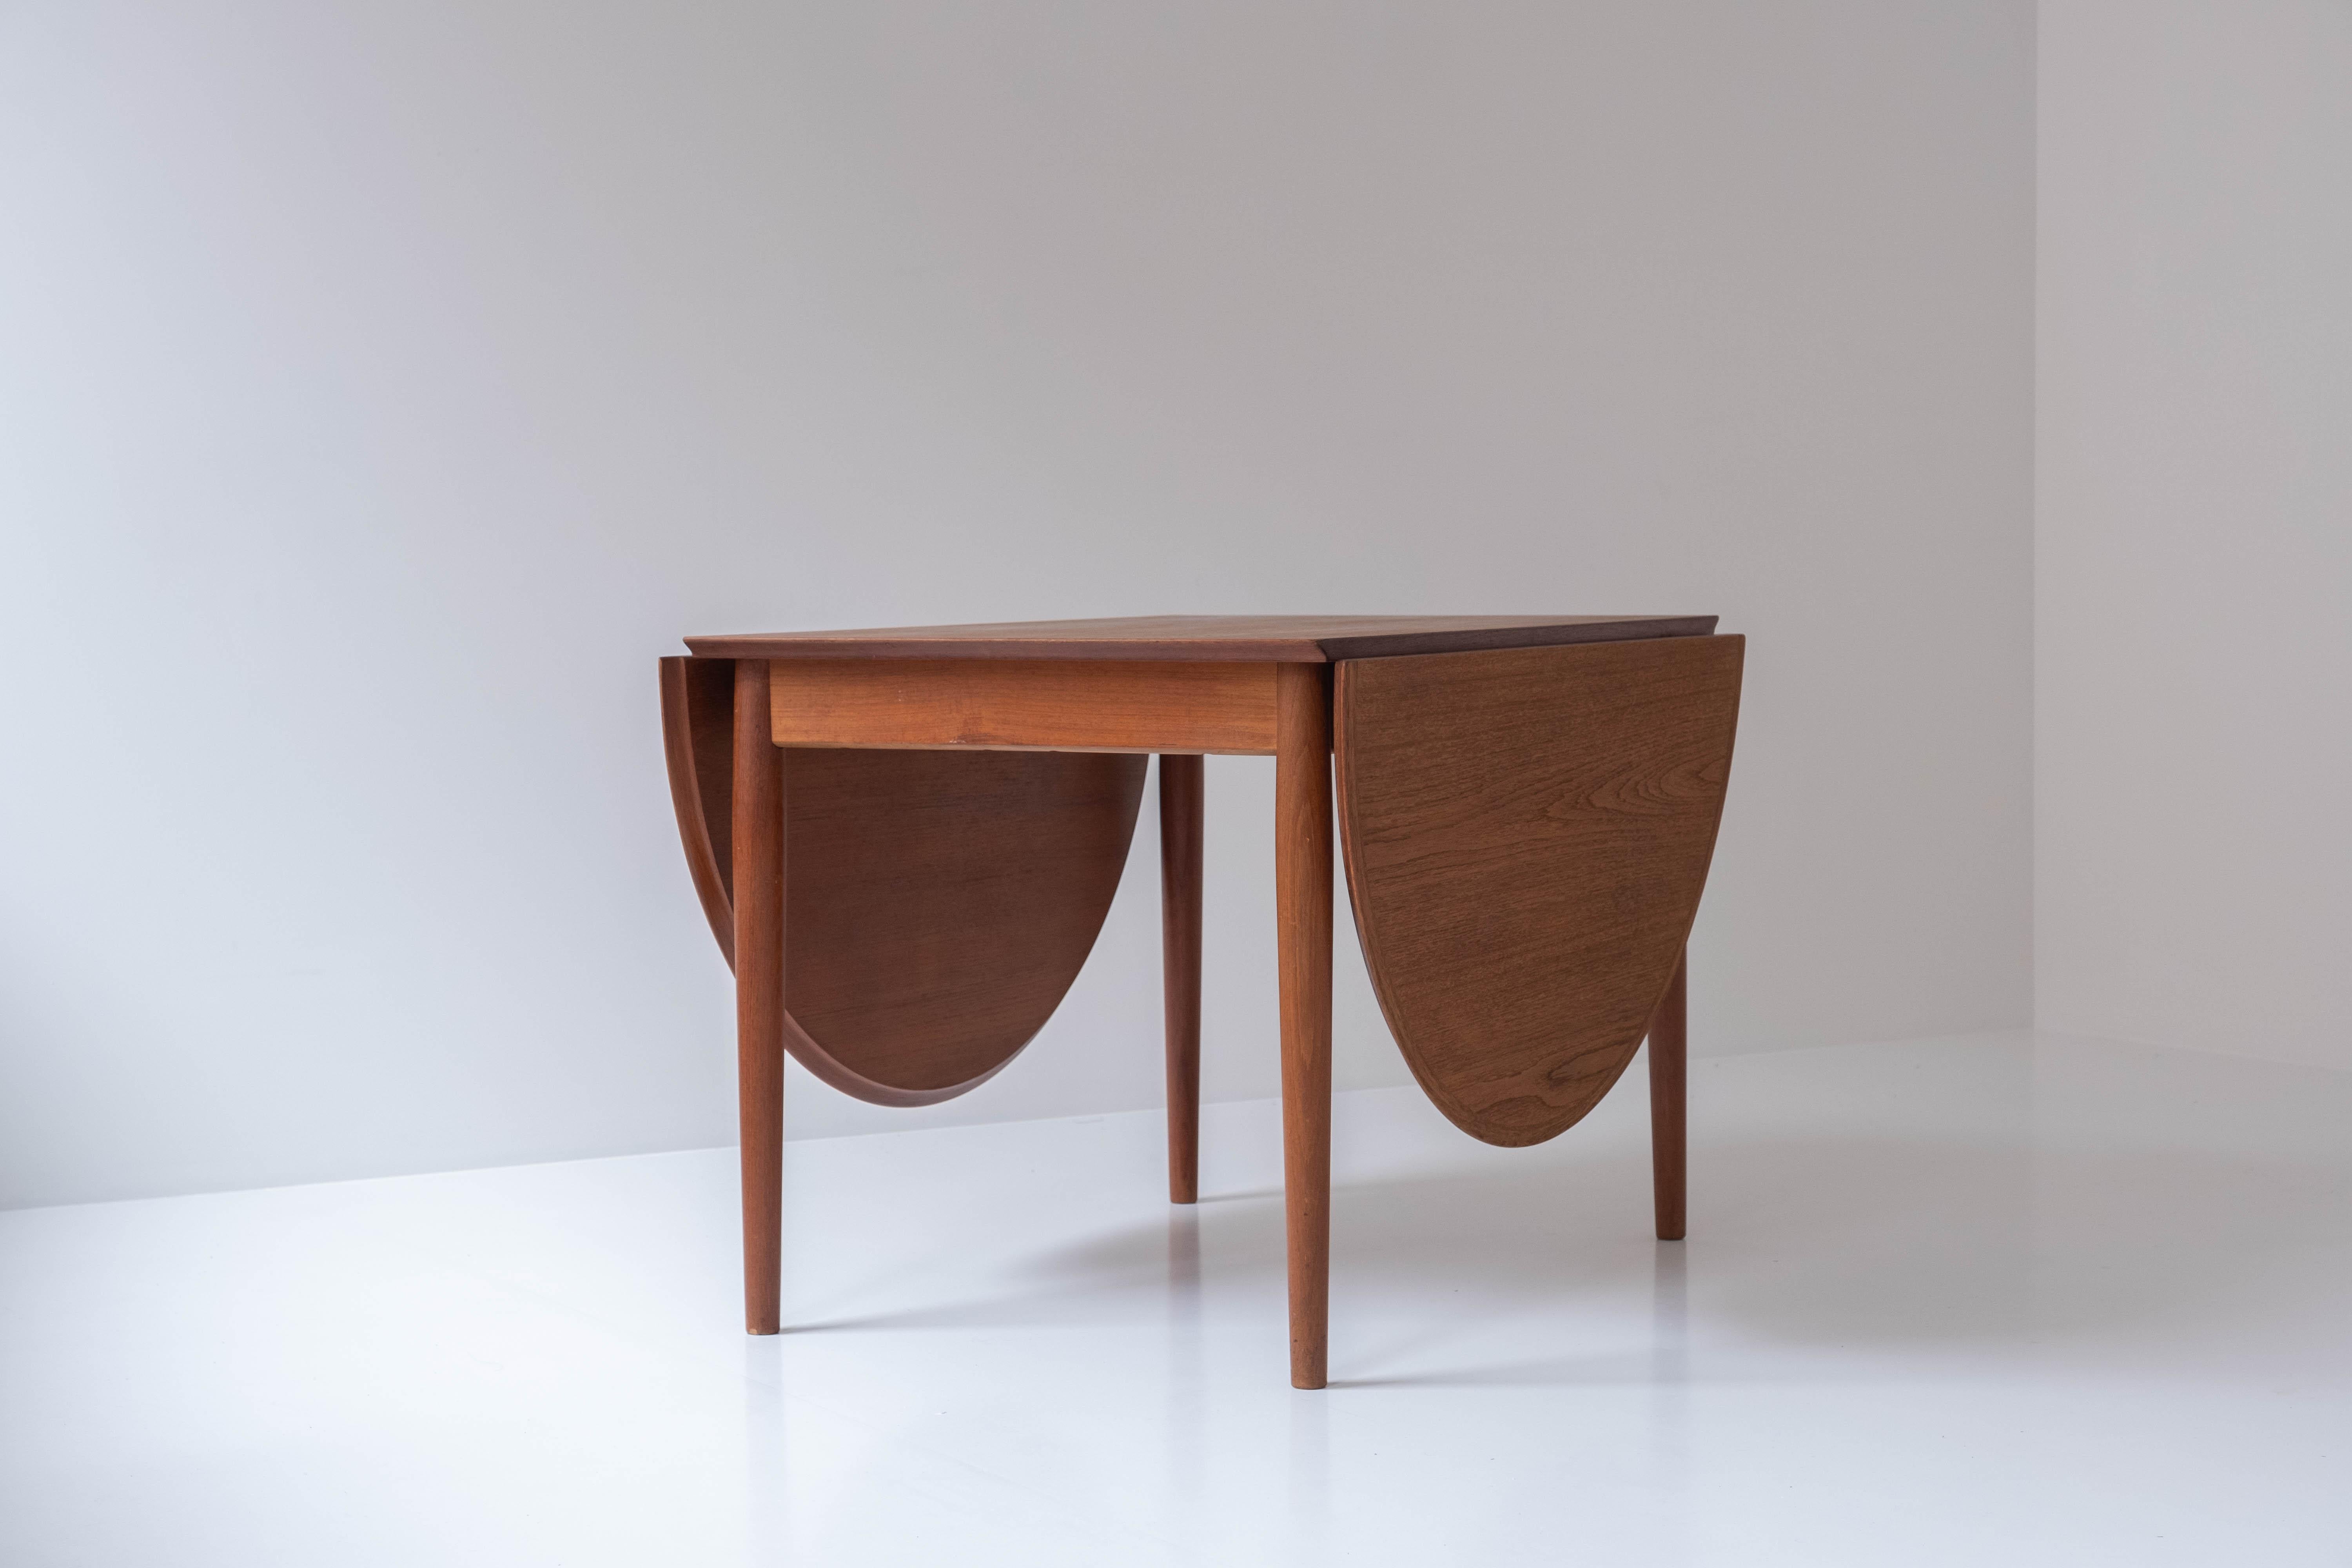 Dining table by Arne Vodder for Sibast Møbler, Denmark, 1960s. This table is a rare version of the Classic 227 dining table, it has only extensions at the ends, not in the middle. This version features a veneered teak top and solid teak legs.